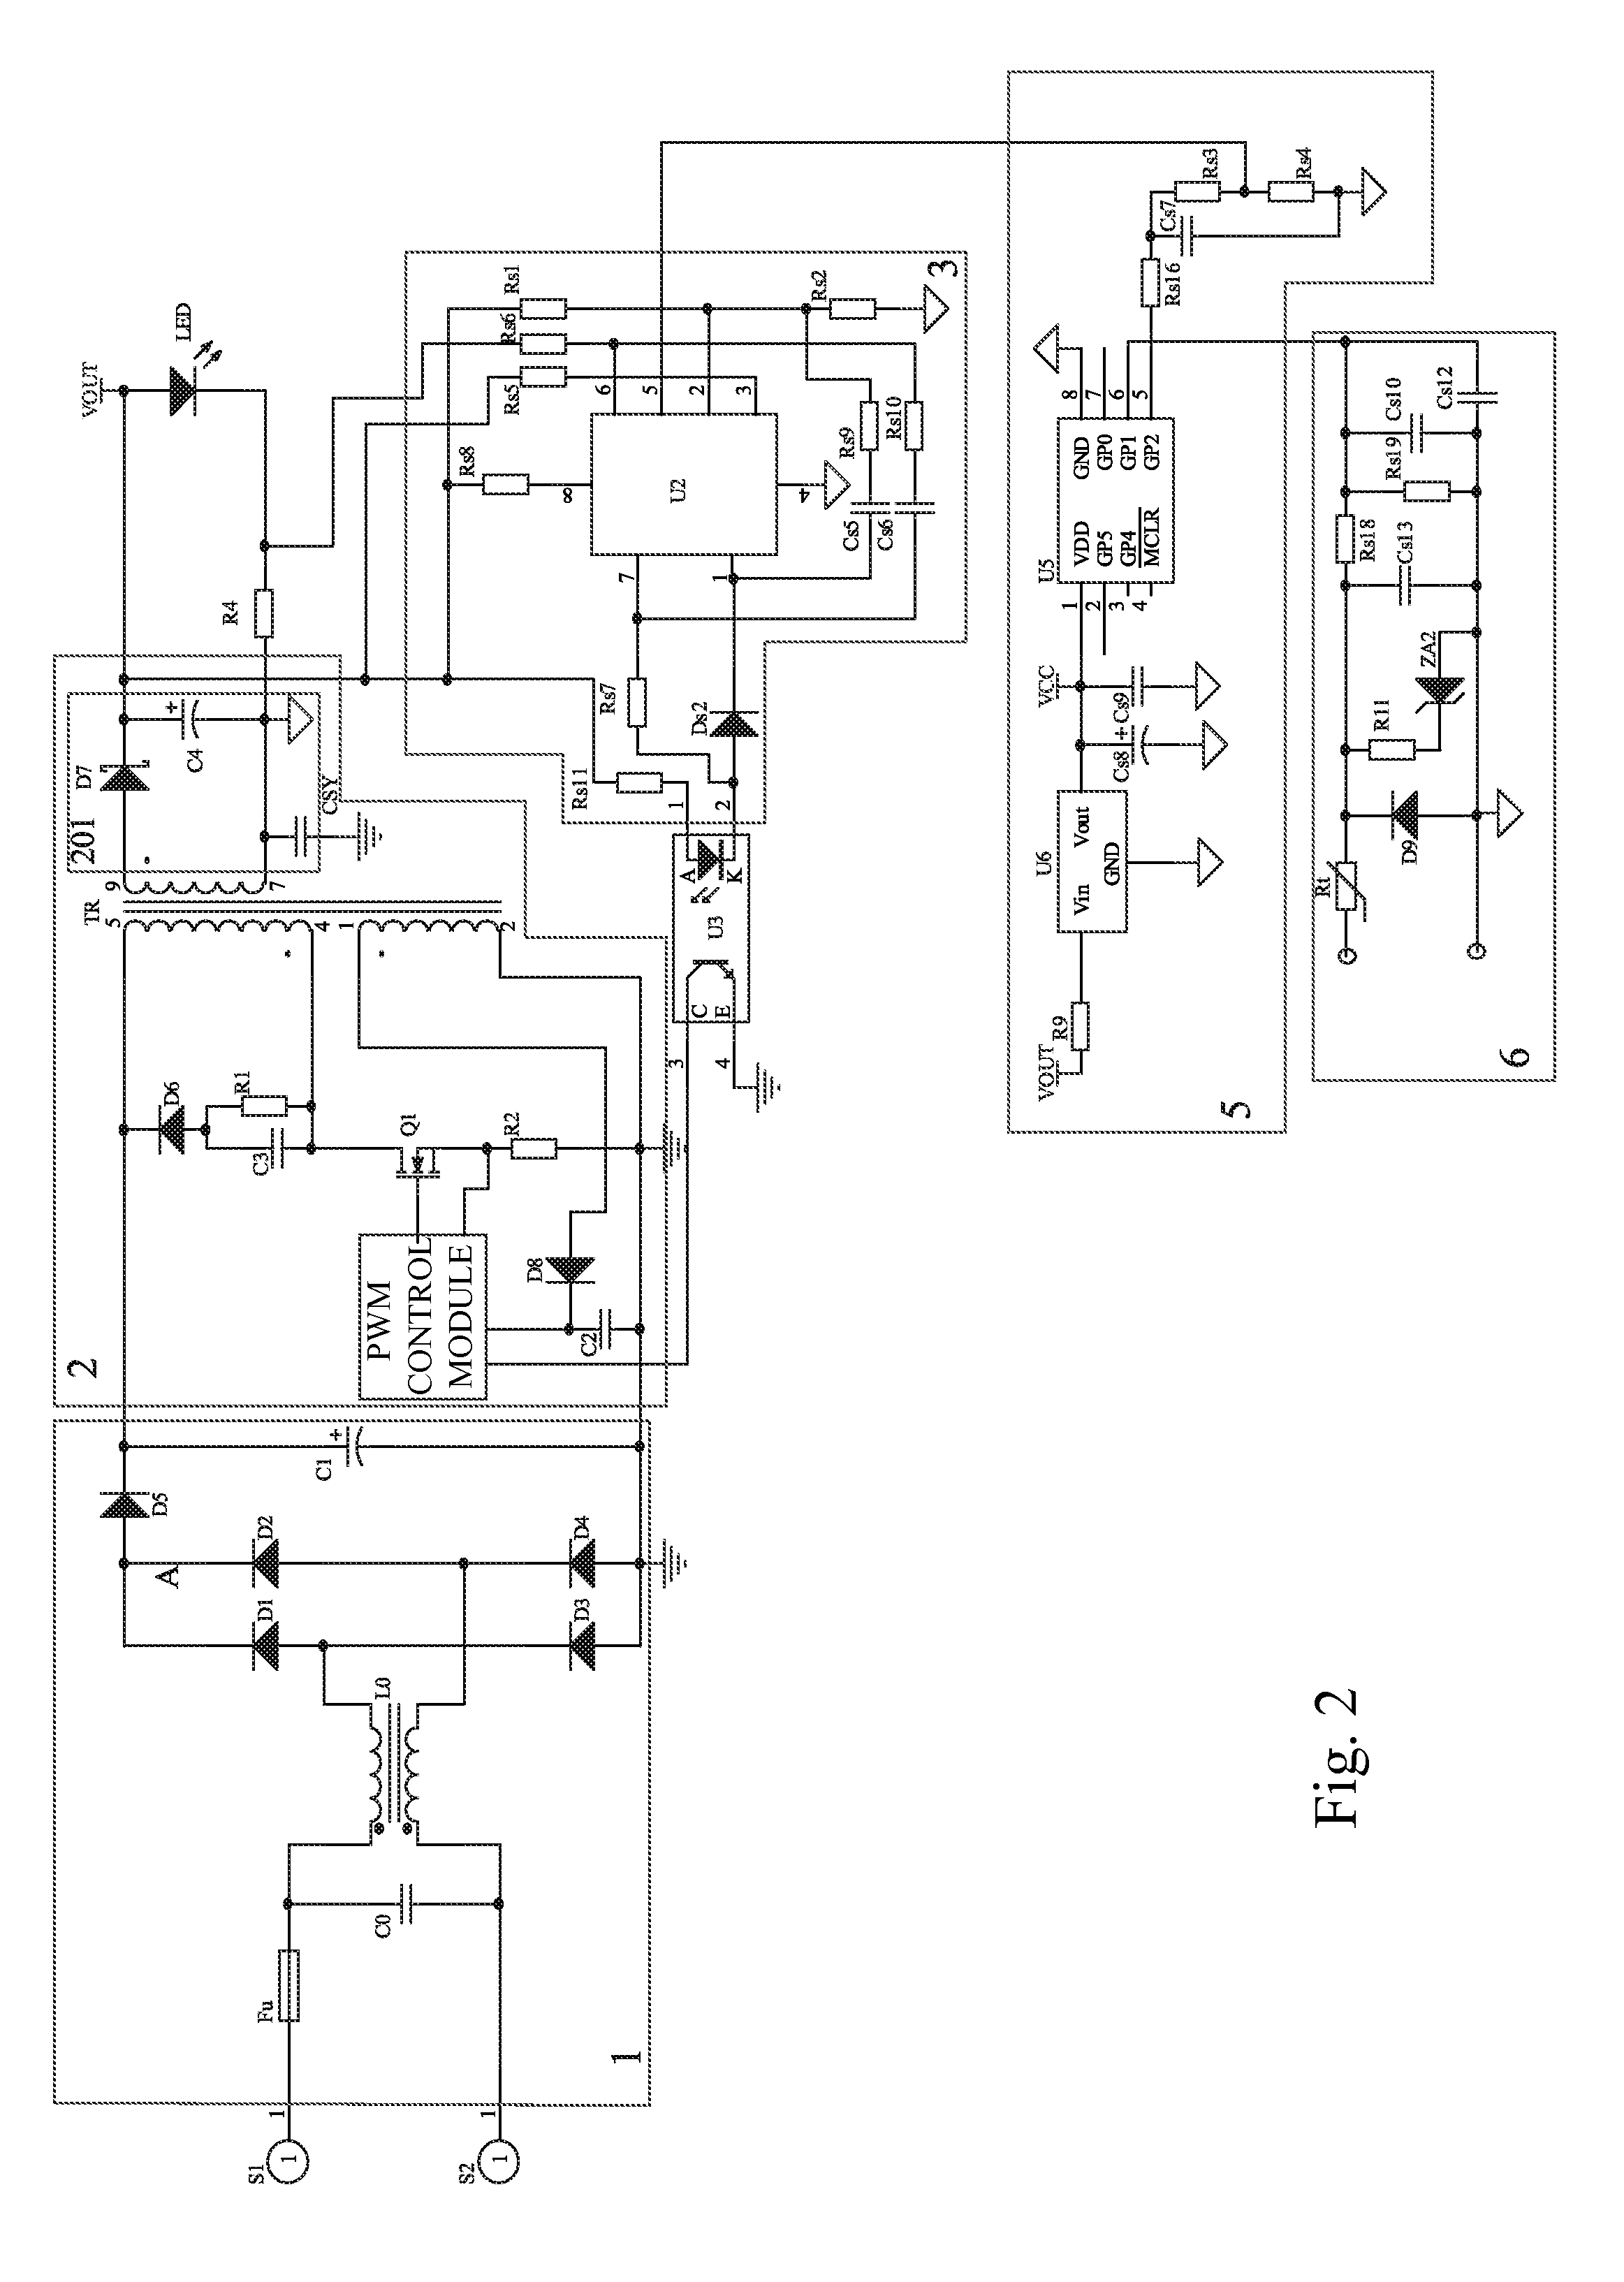 Stepped dimming device for LED lamp